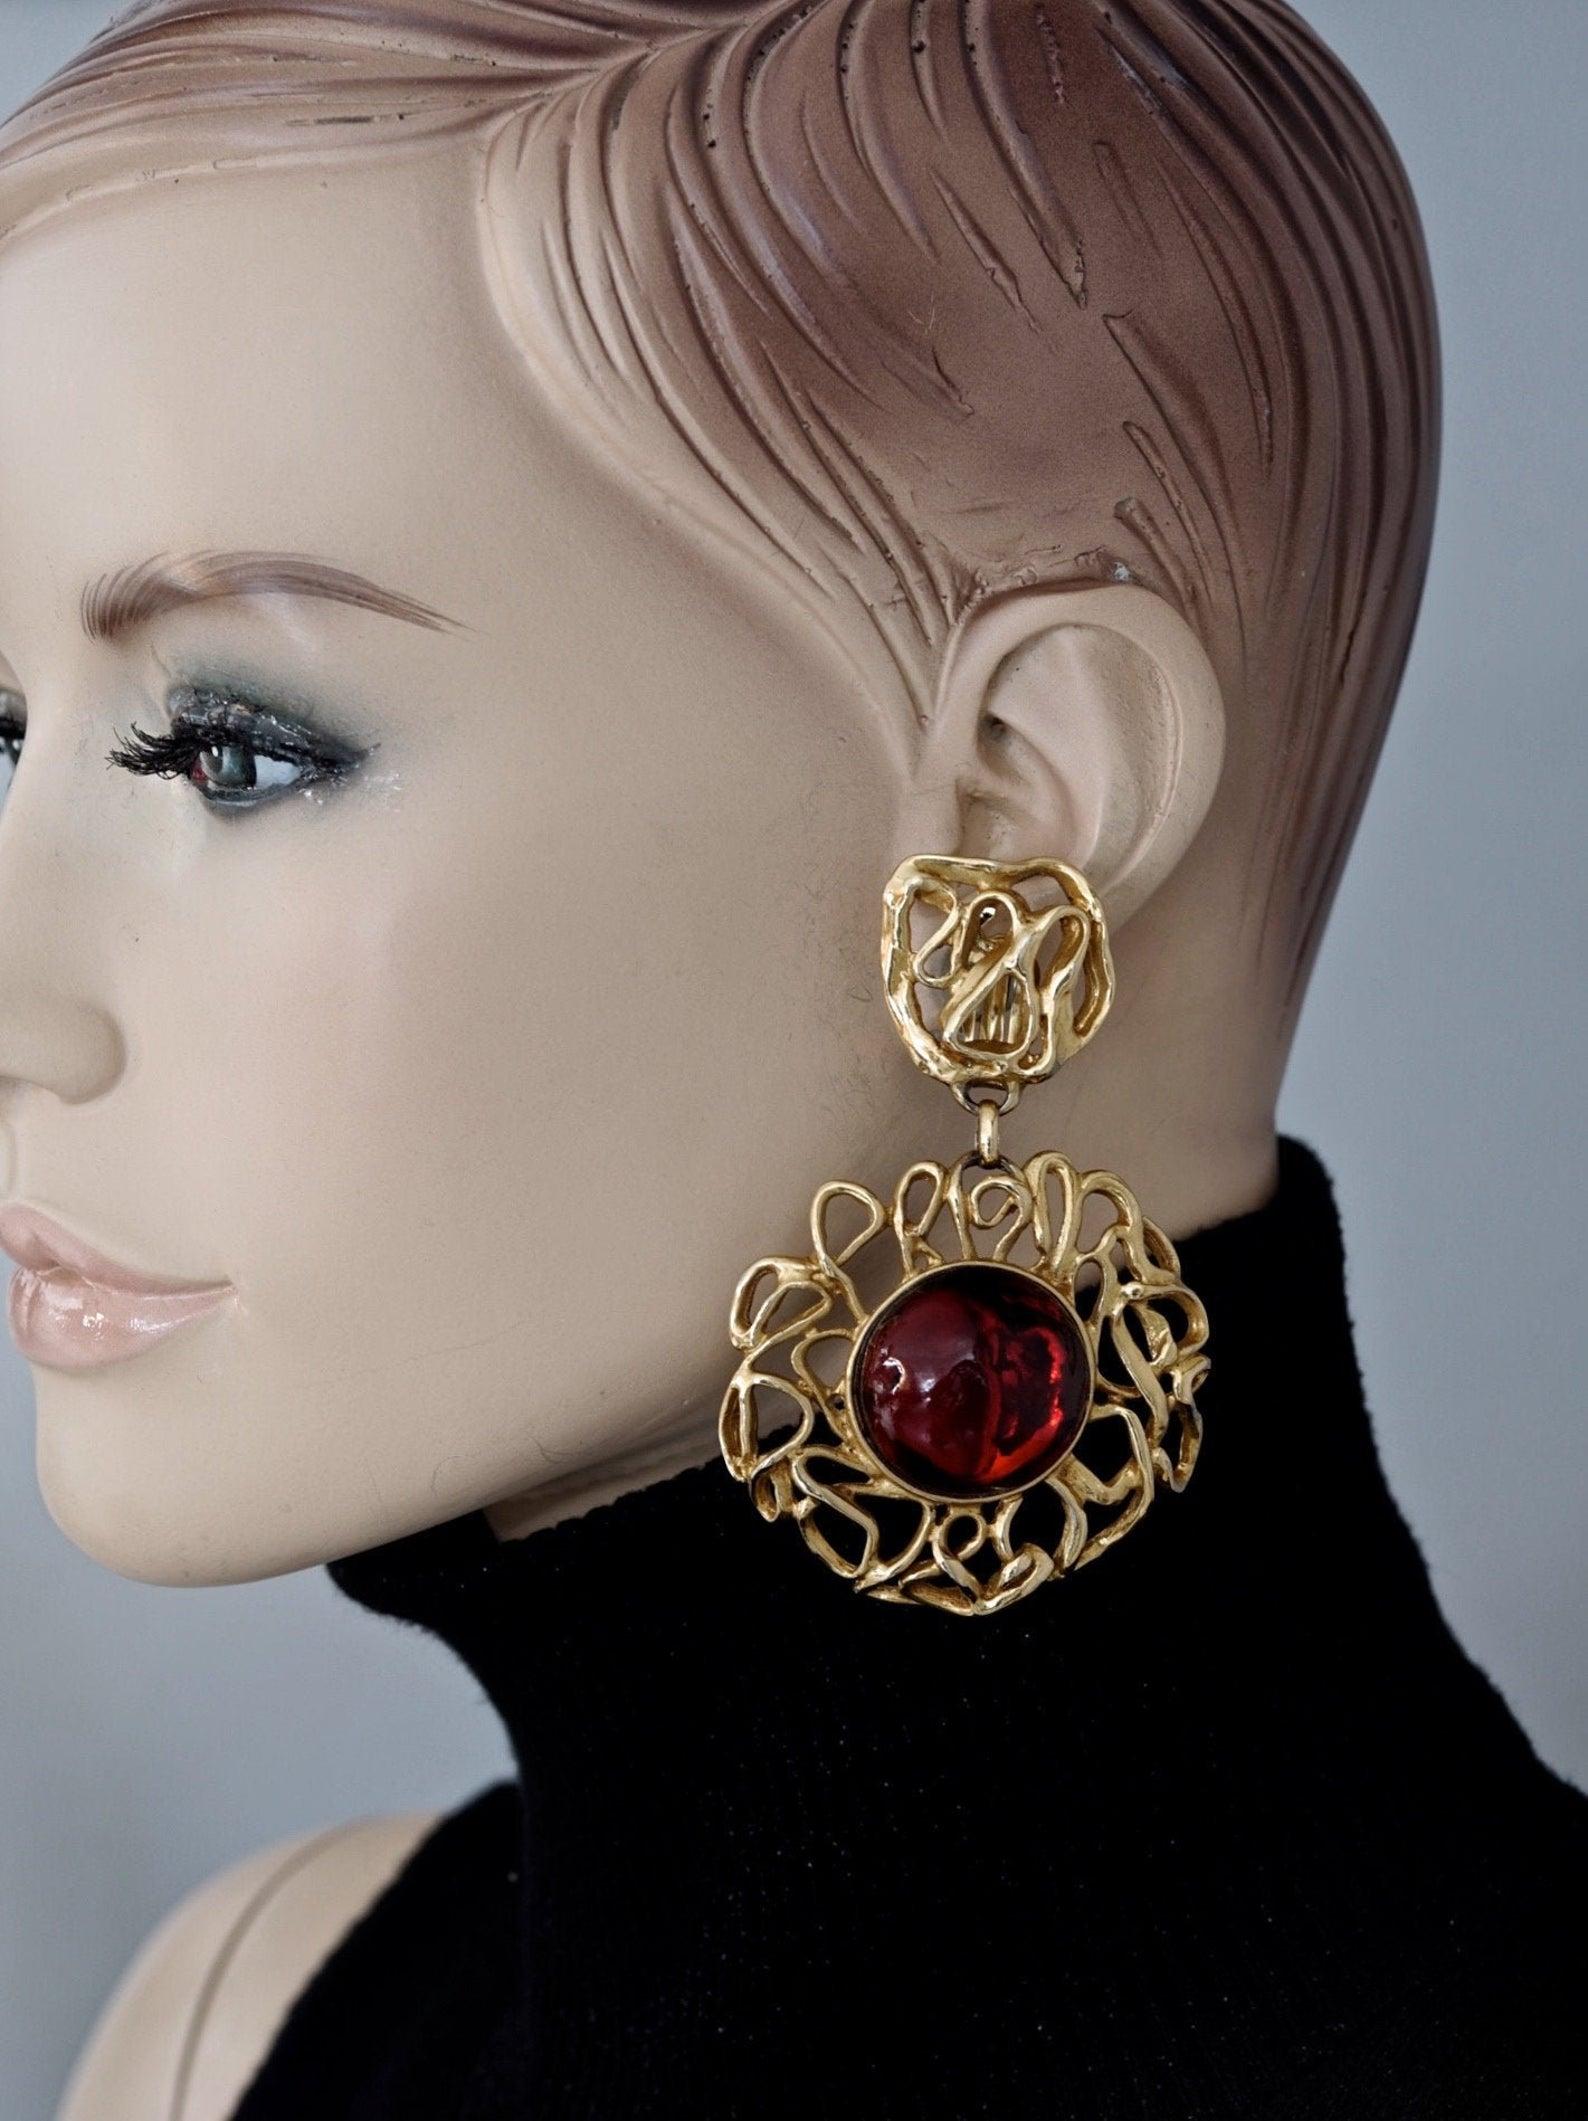 Vintage YVES SAINT LAURENT Ysl by Robert Goossens Ruby Cabochon Wire Flower Dangling Earrings

Measurements:
Height: 3.42 inches (8.7 cm)
Width: 2.16 inches (5.5 cm)
Weight per Earring: 31 grams

Features:
- 100% Authentic YVES SAINT LARENT by